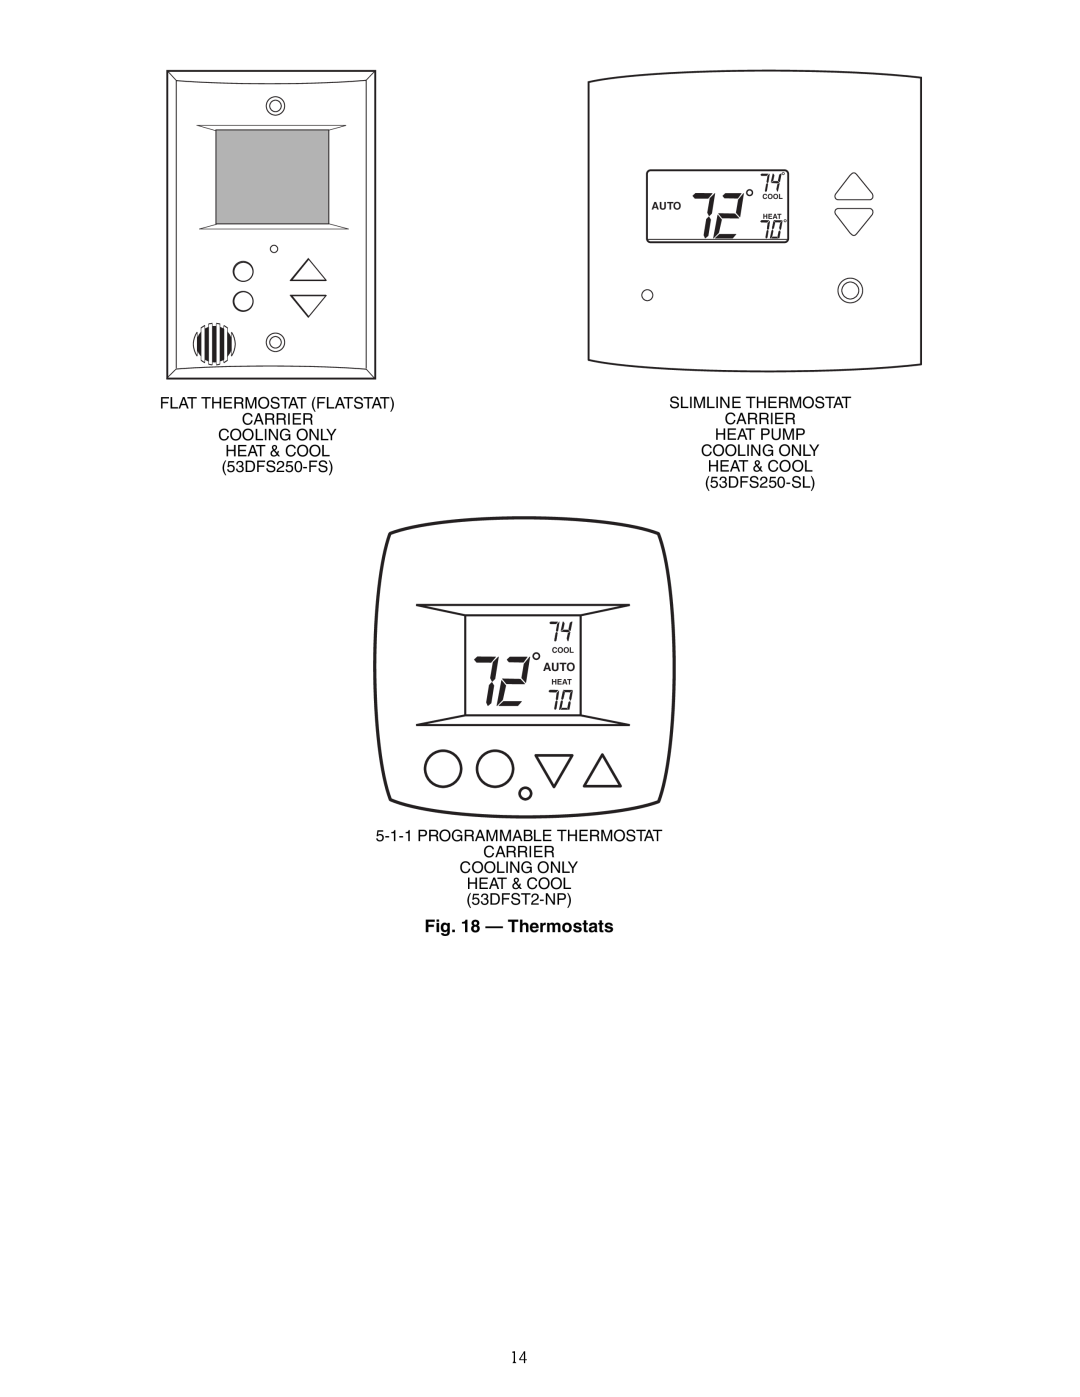 Carrier 40QA024-060 specifications Thermostats, Slimline Thermostat, Carrier, Cooling Only, Heat Pump, Heat & Cool, Auto 